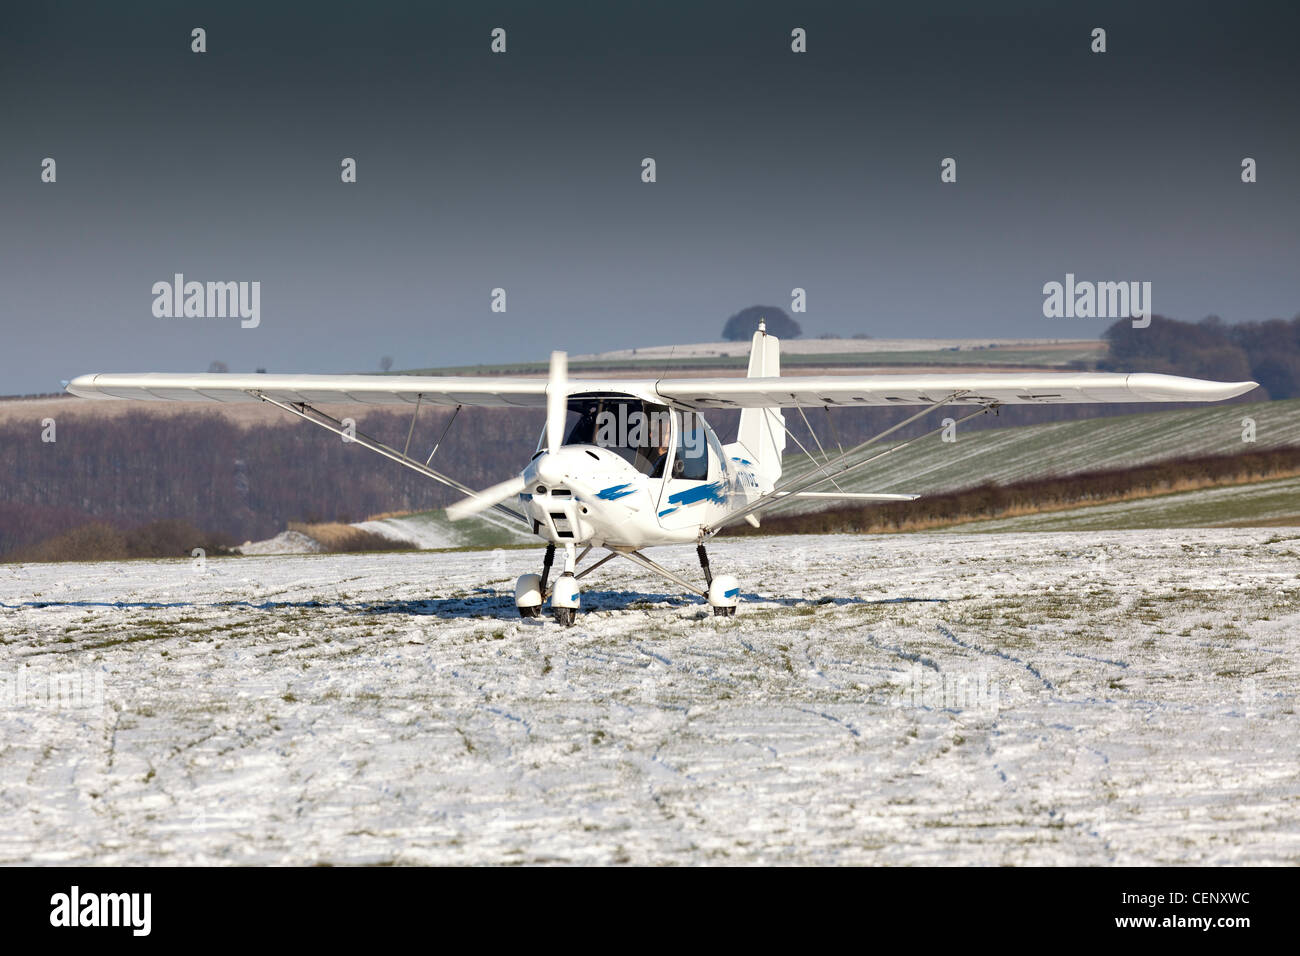 A C42 Ikarus microlight aircraft at Compton Abbas airfield in Dorset in England in snow Stock Photo